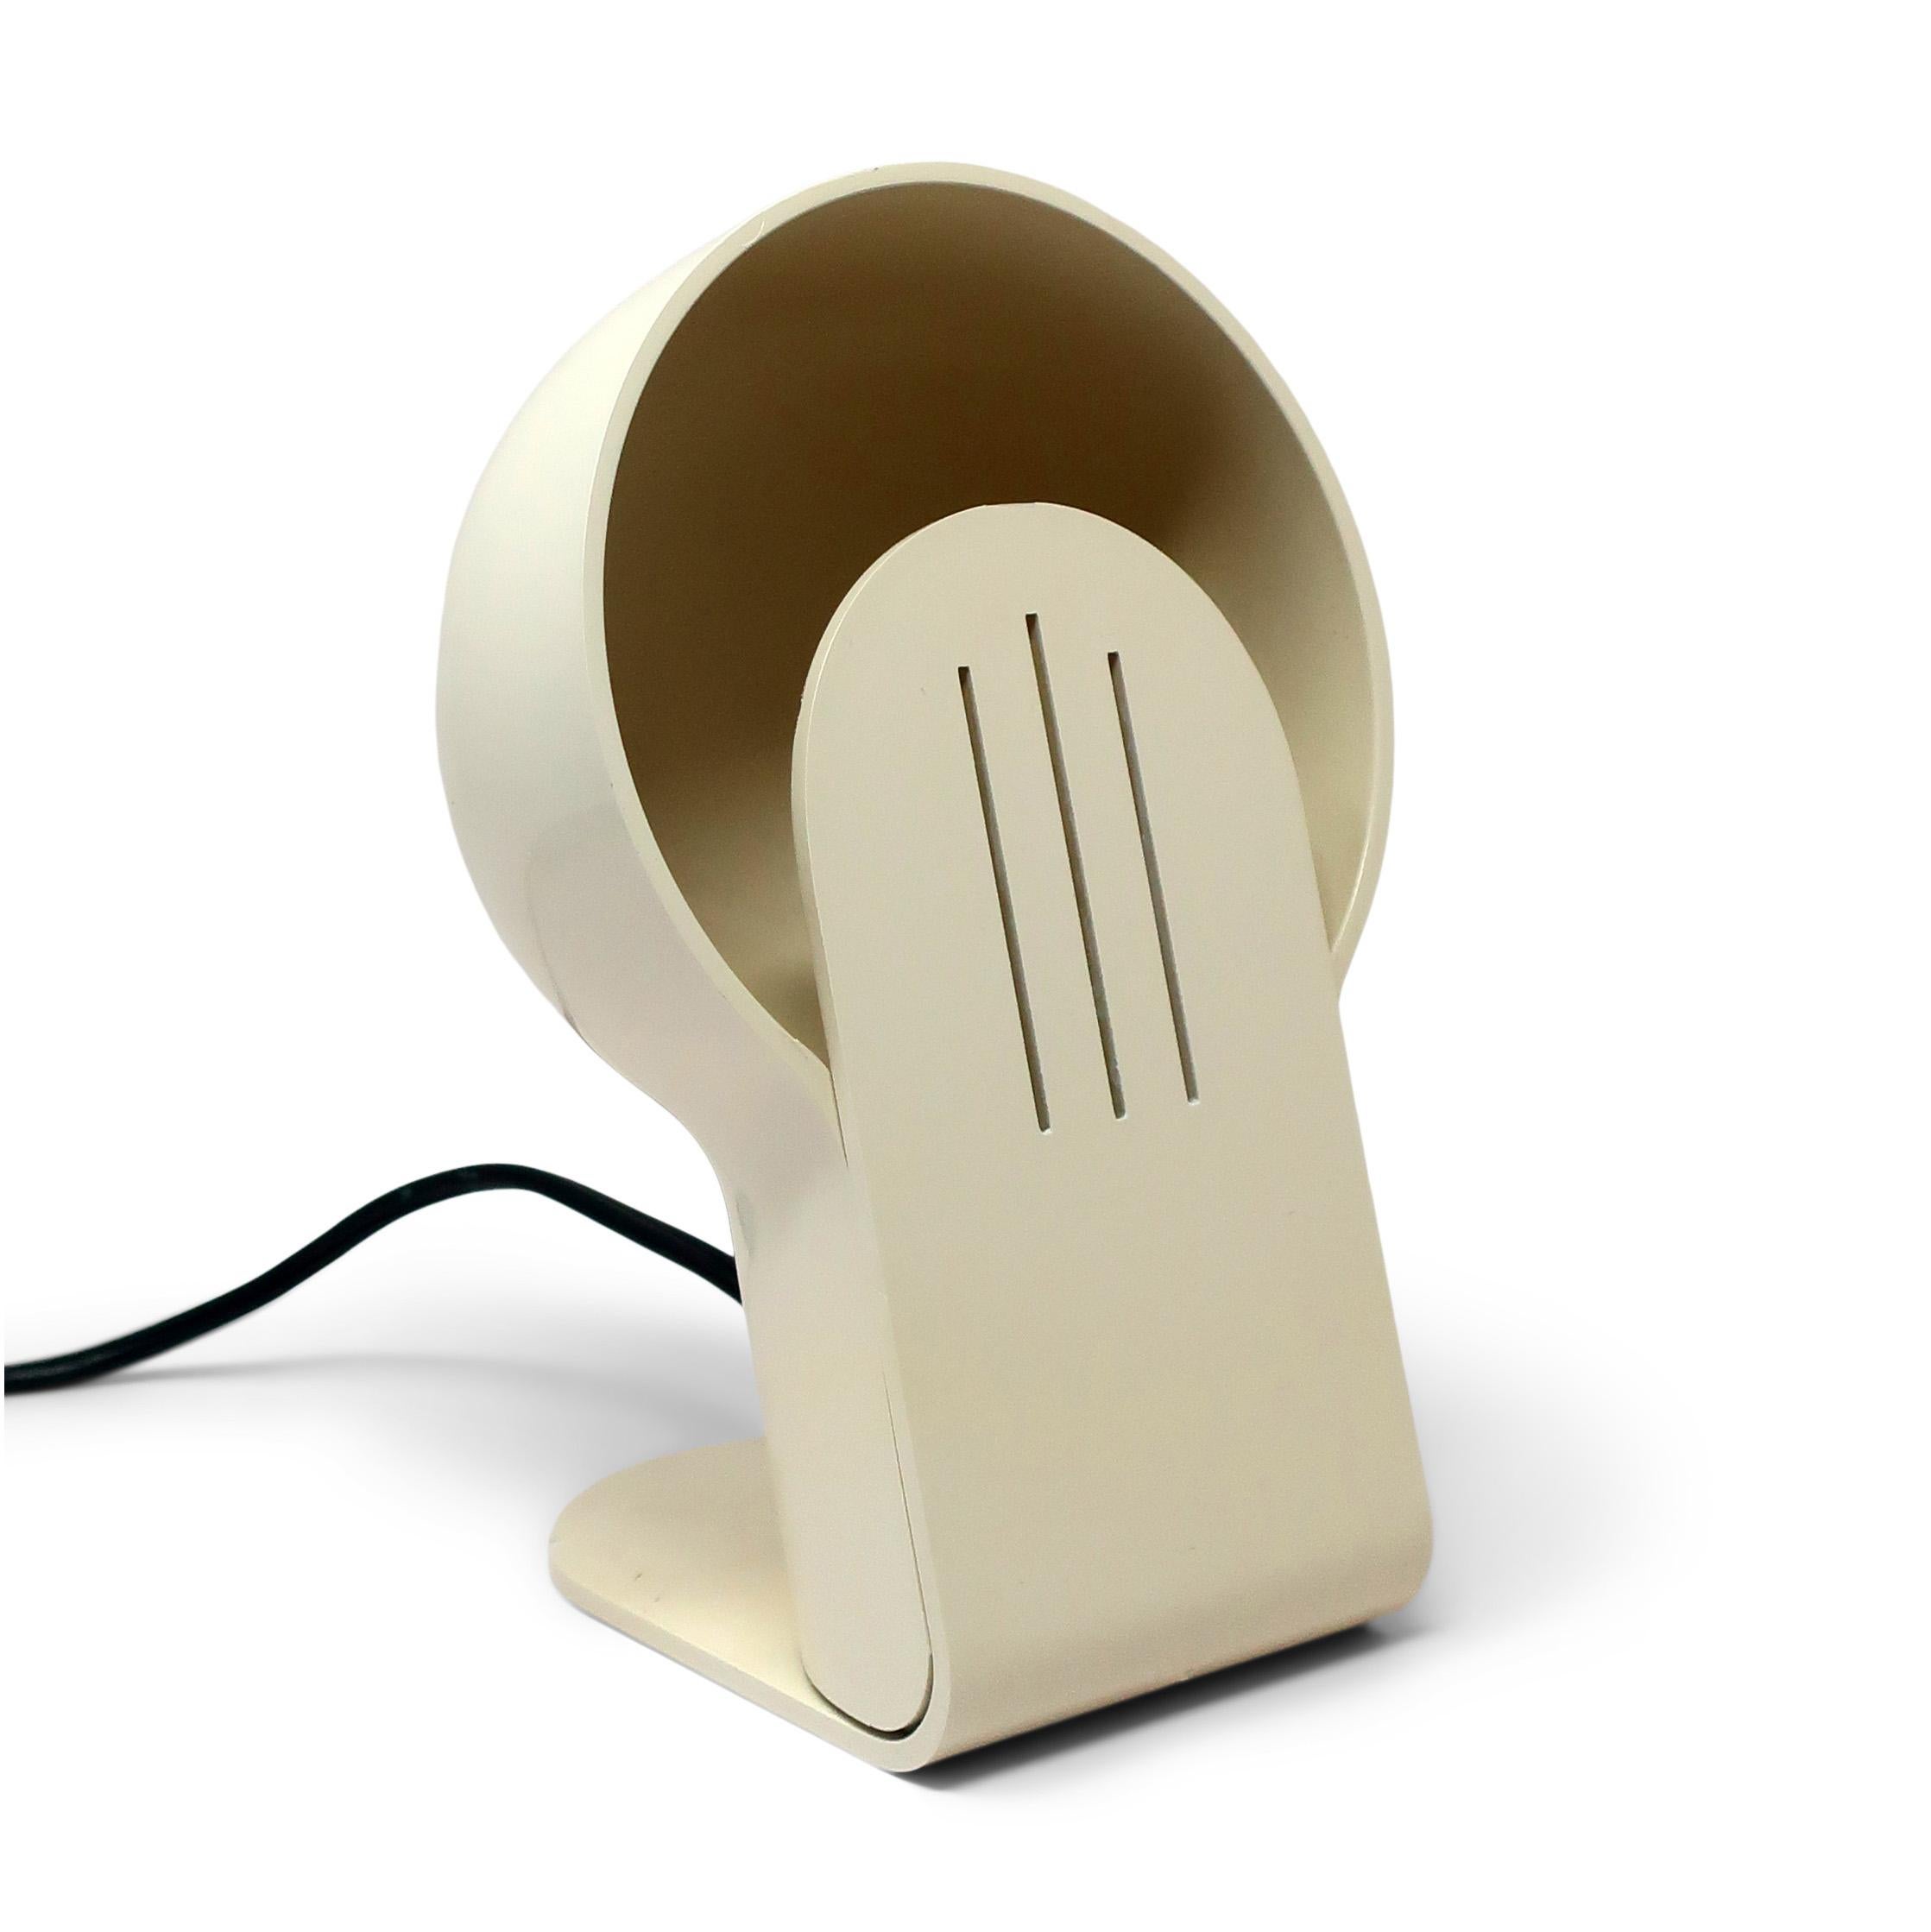 Space age Italian design doesn’t get any better than this 1973-designed Panda lamp by Ambrogio Pozzi for Harveiluce Guzzini. Only in production from 1974 through 1978, the model 3508 lamp has an ingenious design of two plastic pieces that fit